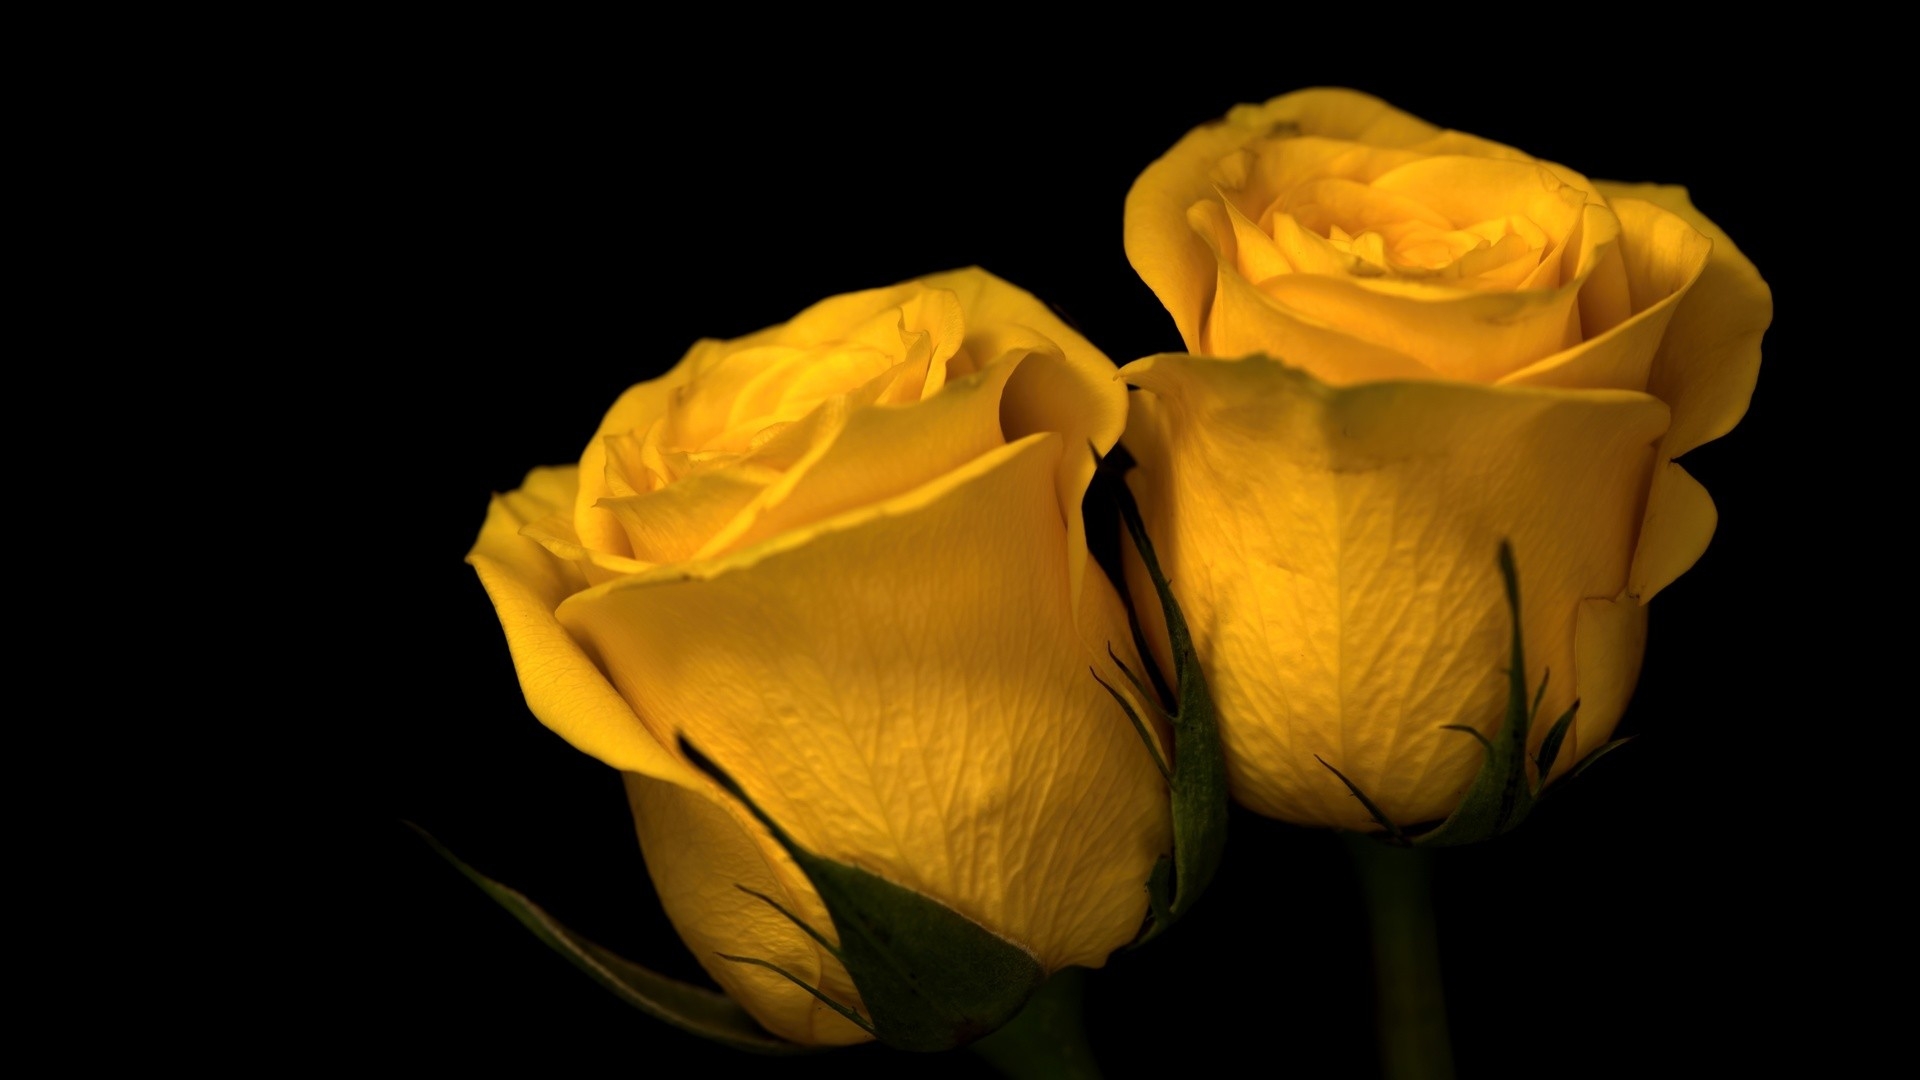 Two yellow roses on a black background